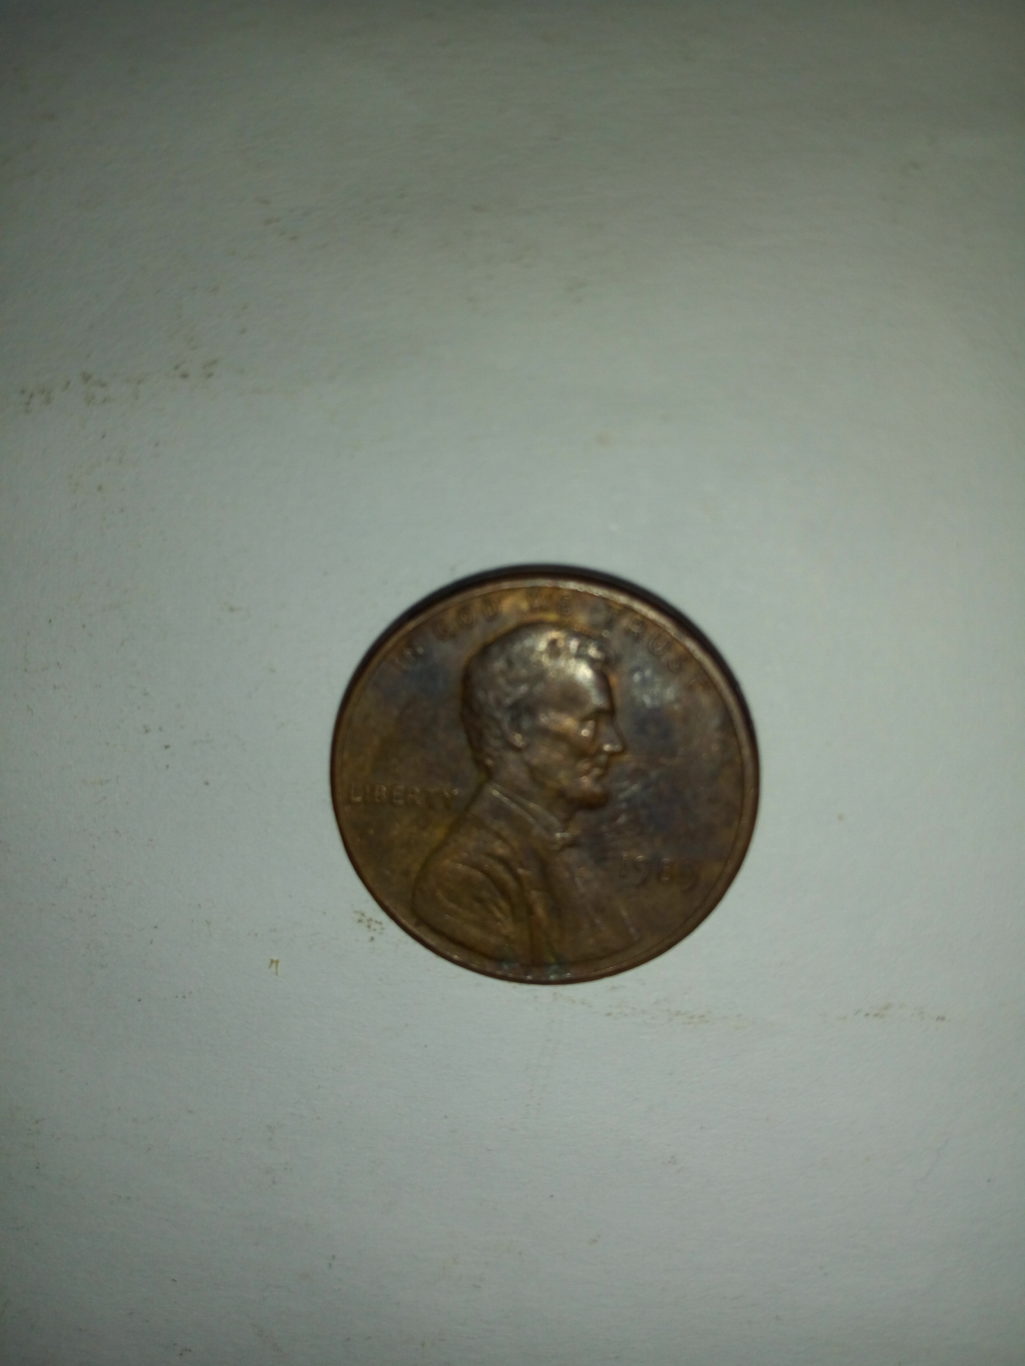 1989_united States of America 1 cent